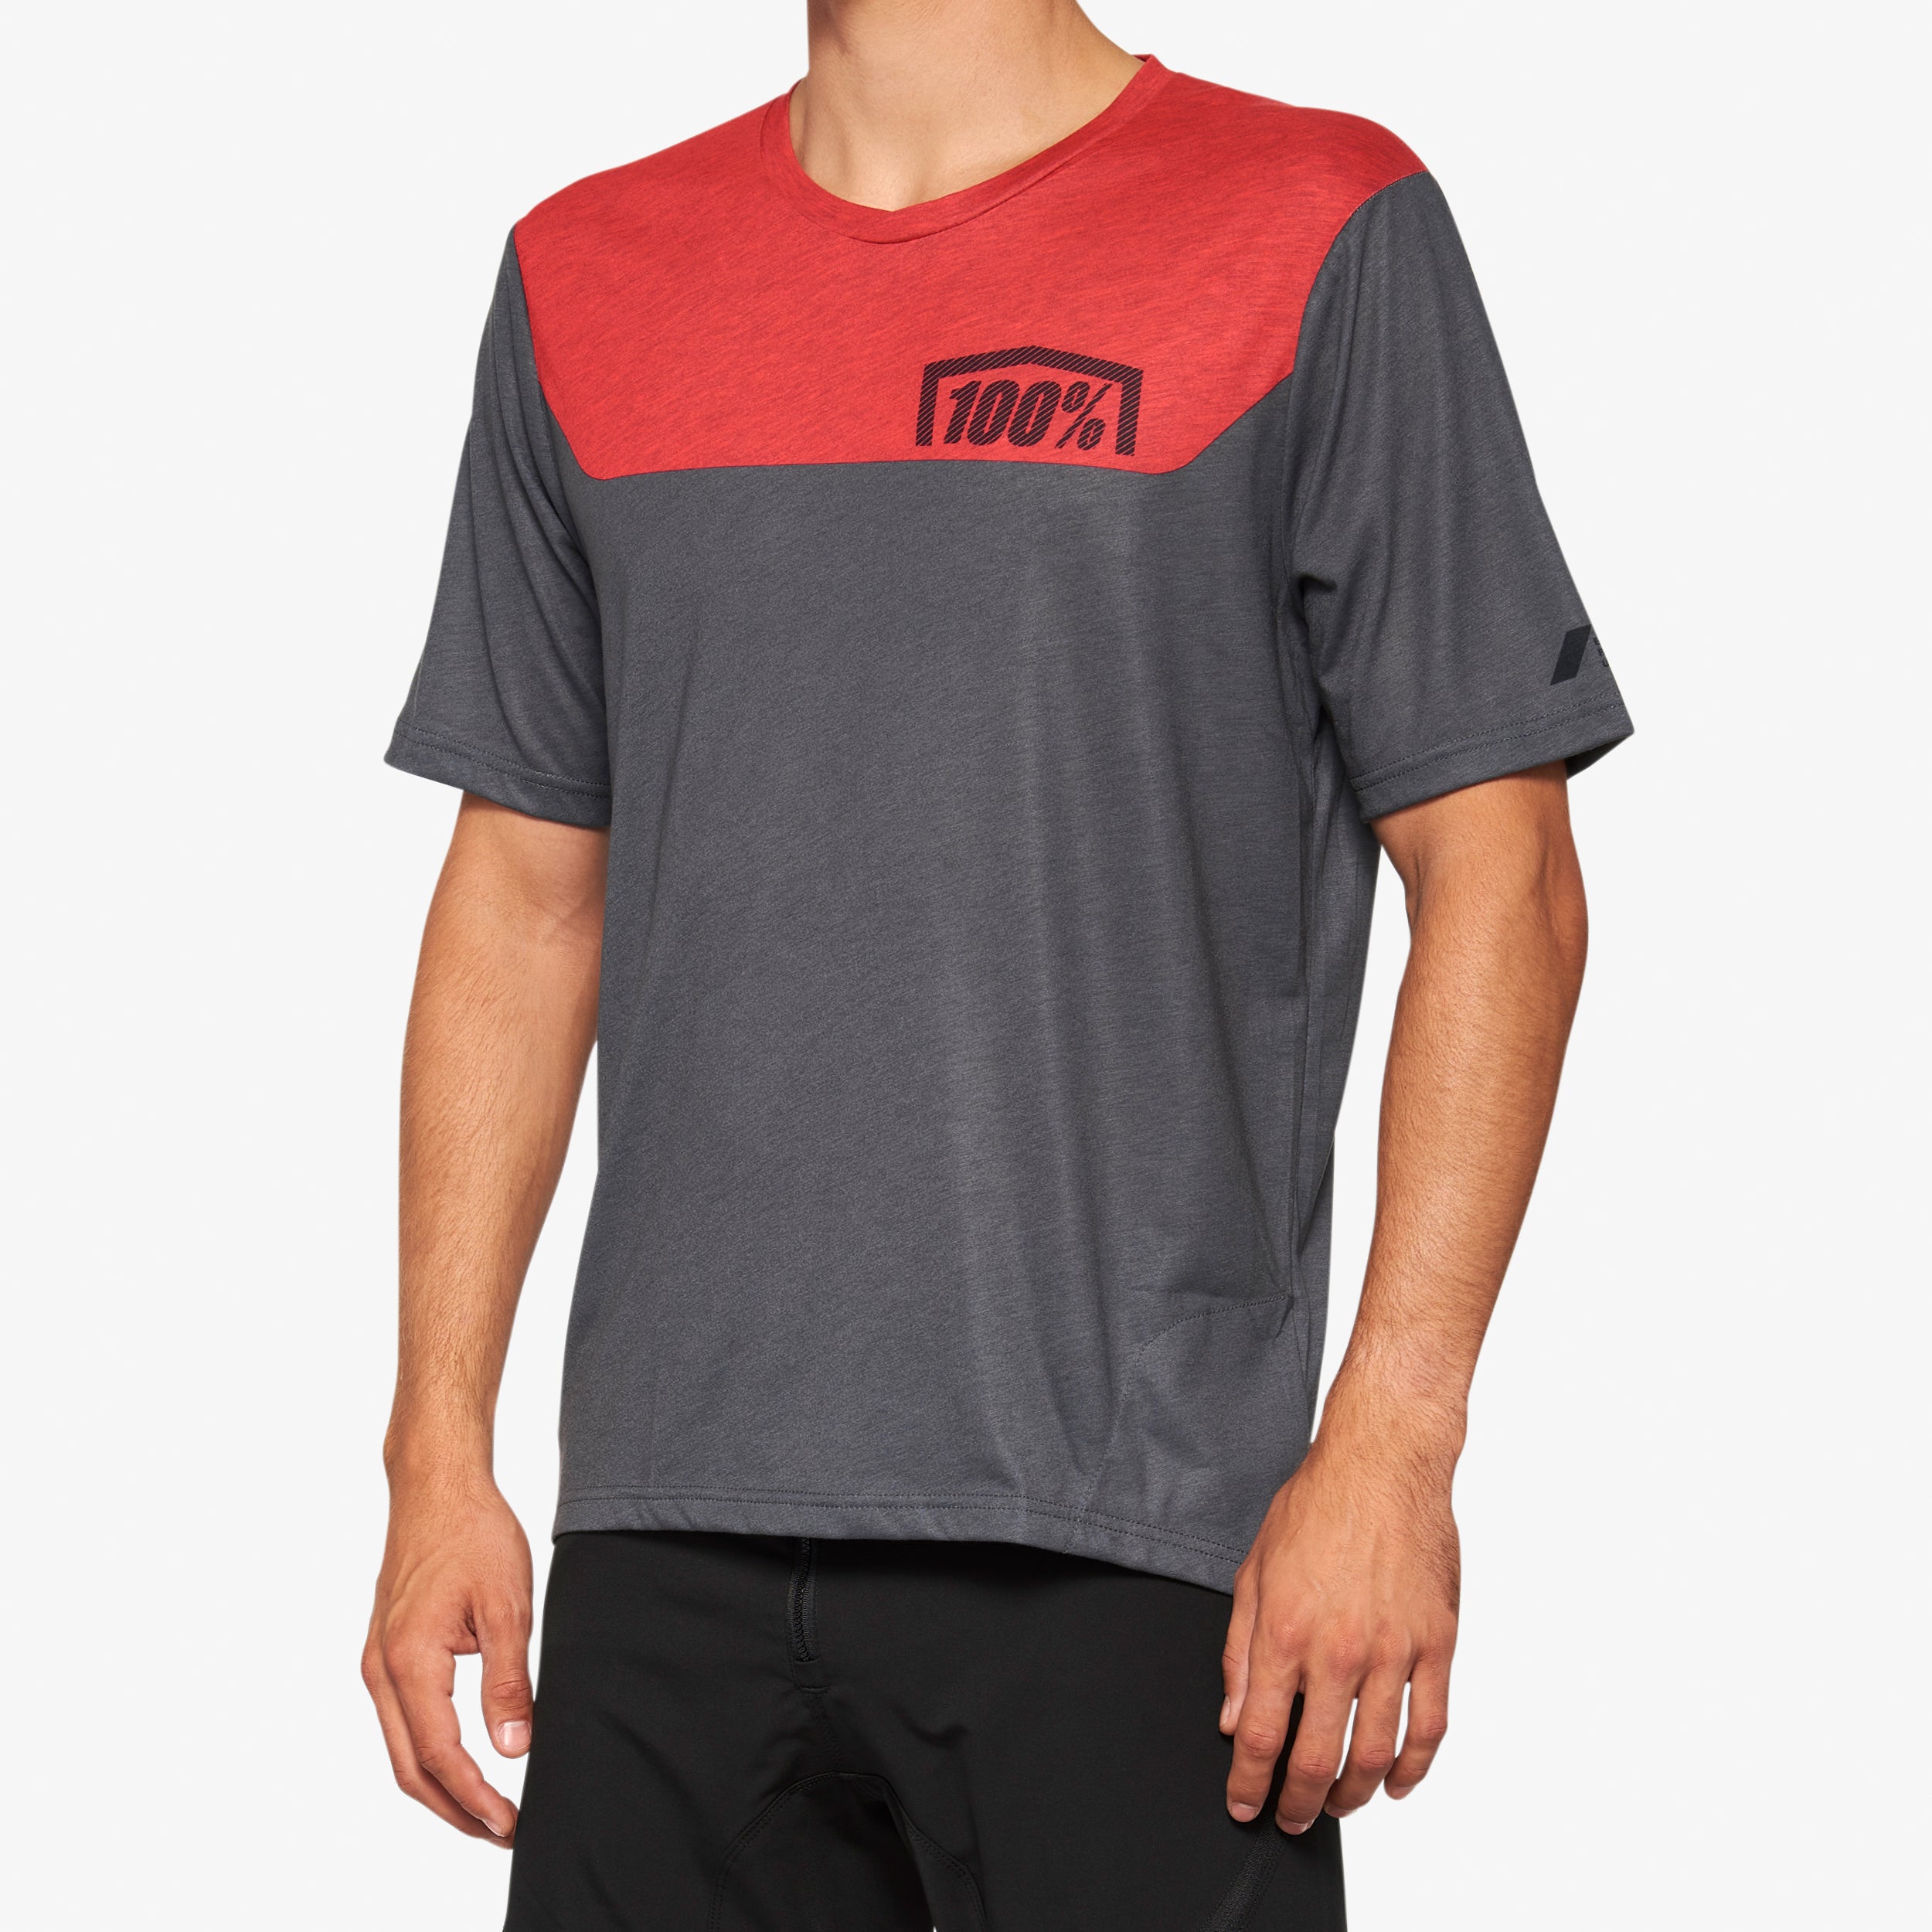 AIRMATIC Short Sleeve Jersey Charcoal/Racer Red